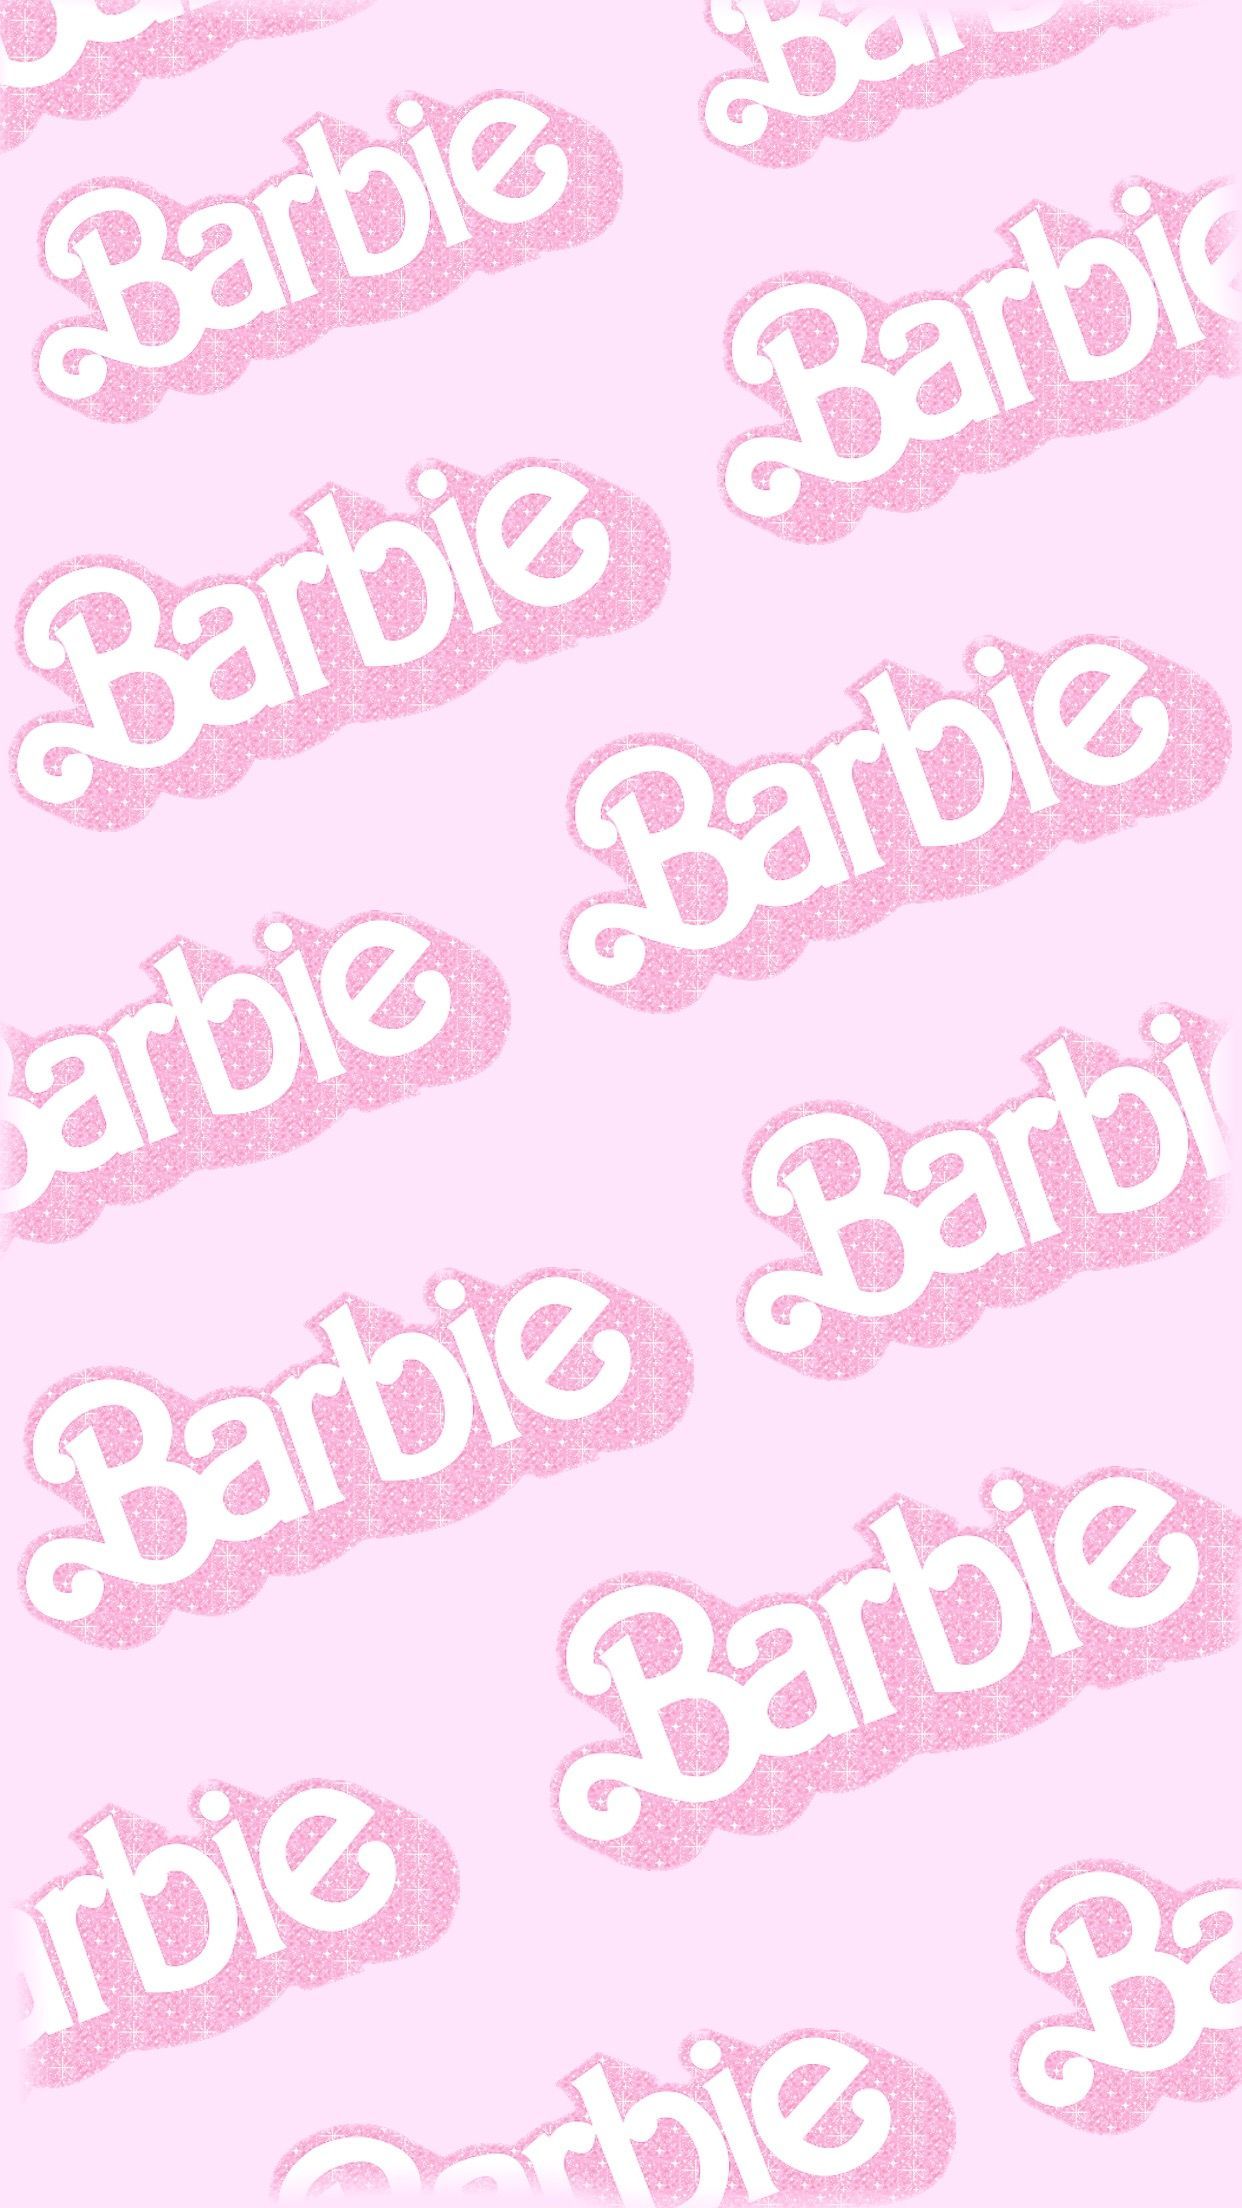 Barbie wallpaper for your phone! - Barbie